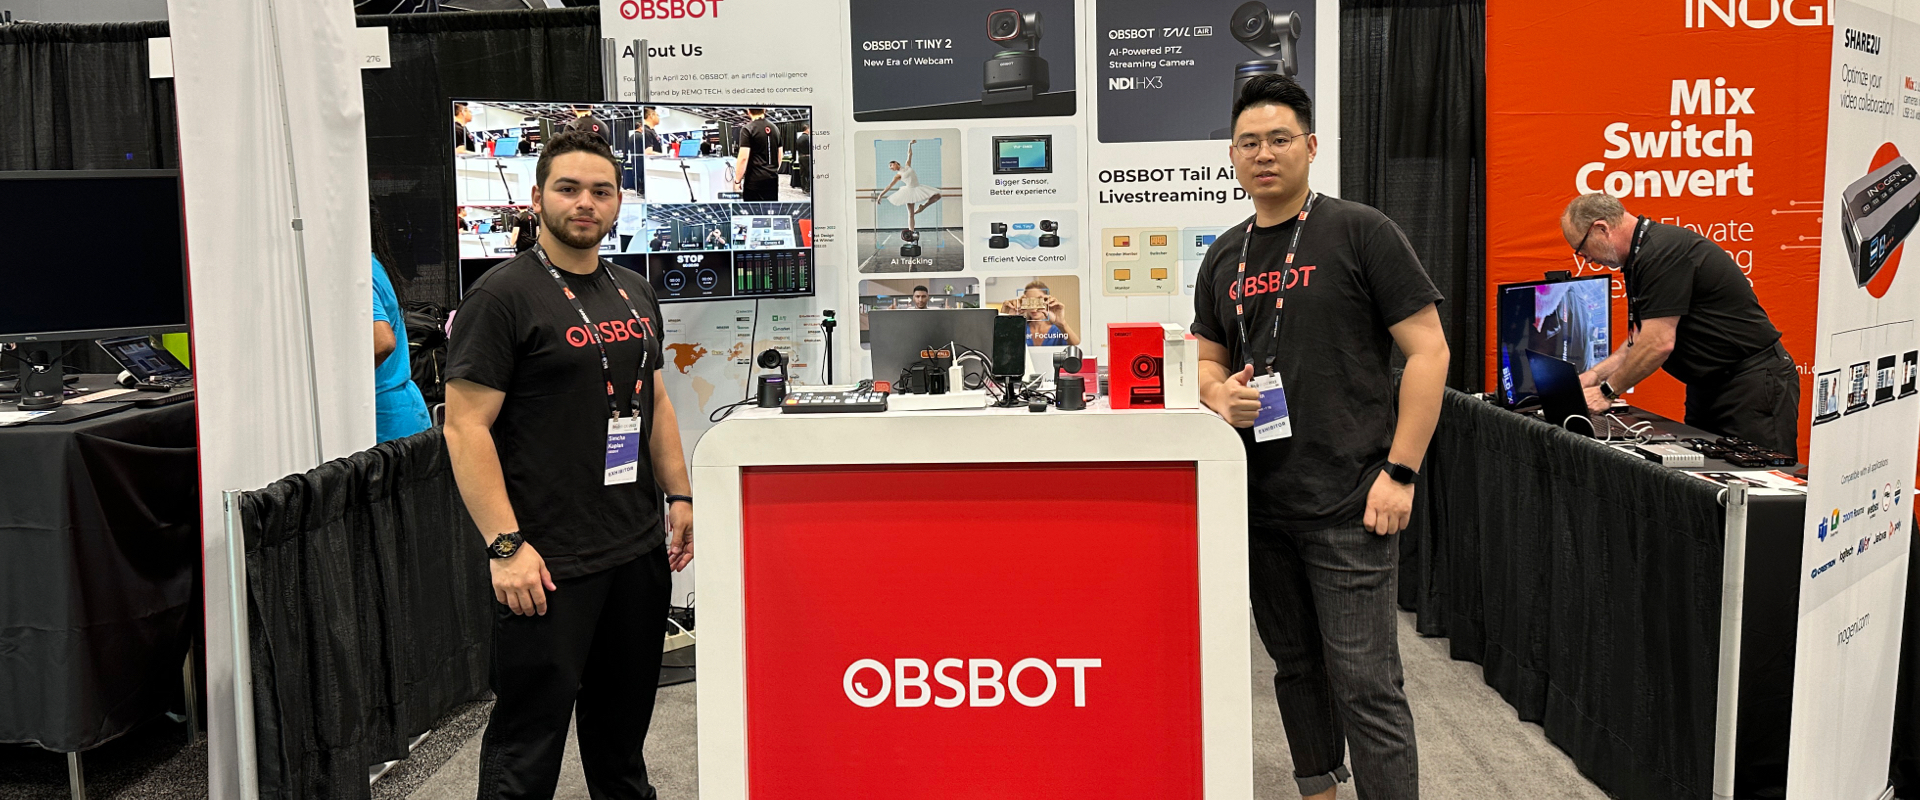 obsbot showcases tiny 2 and tail air at b&h bild expo